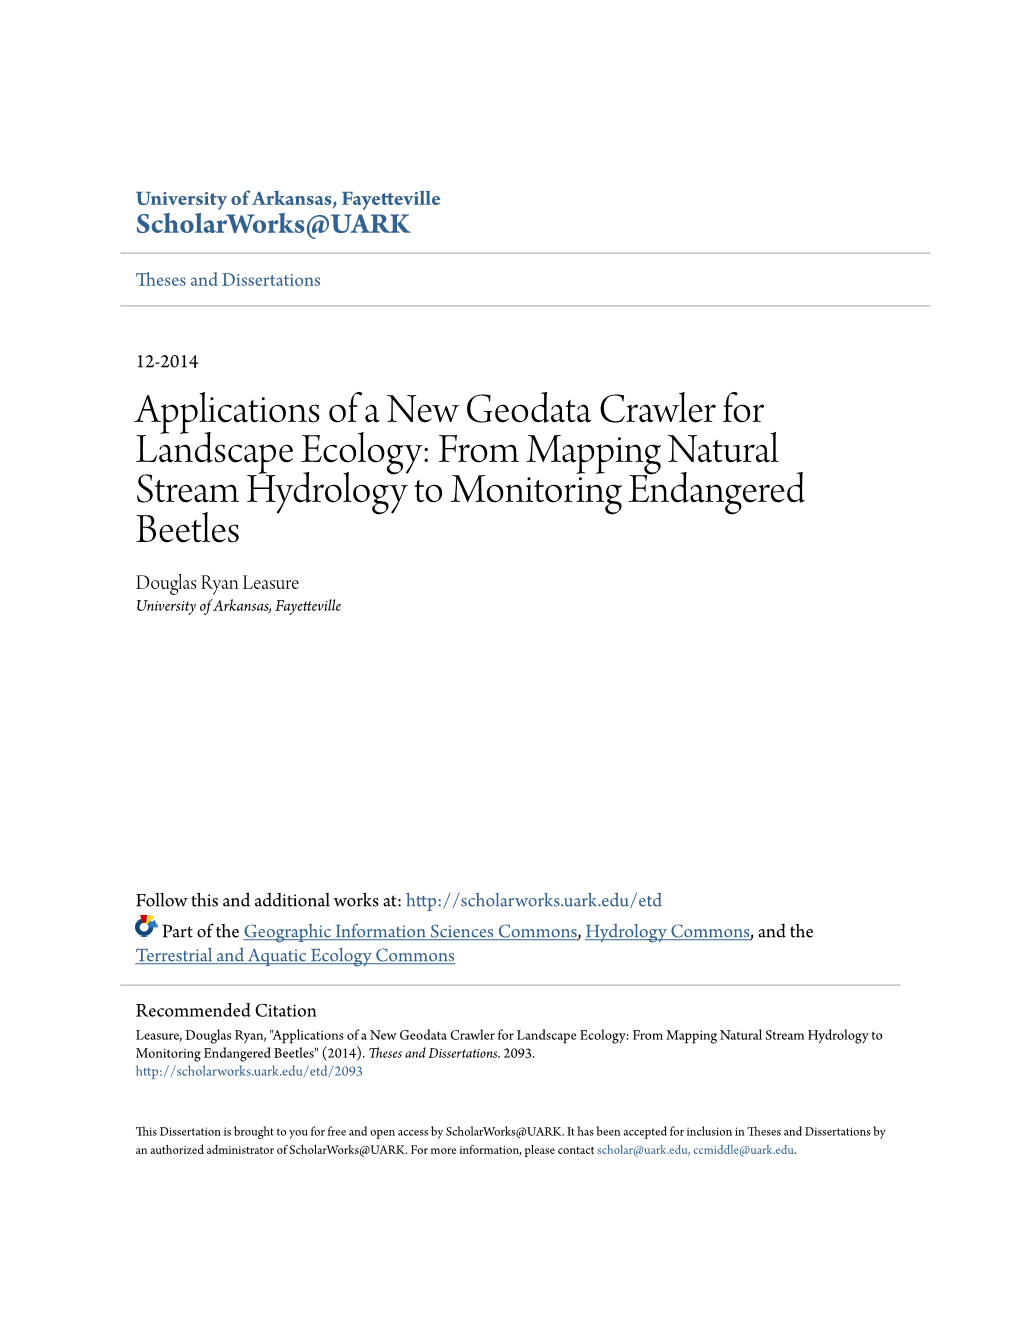 Applications of a New Geodata Crawler for Landscape Ecology: from Mapping Natural Stream Hydrology to Monitoring Endangered Beet